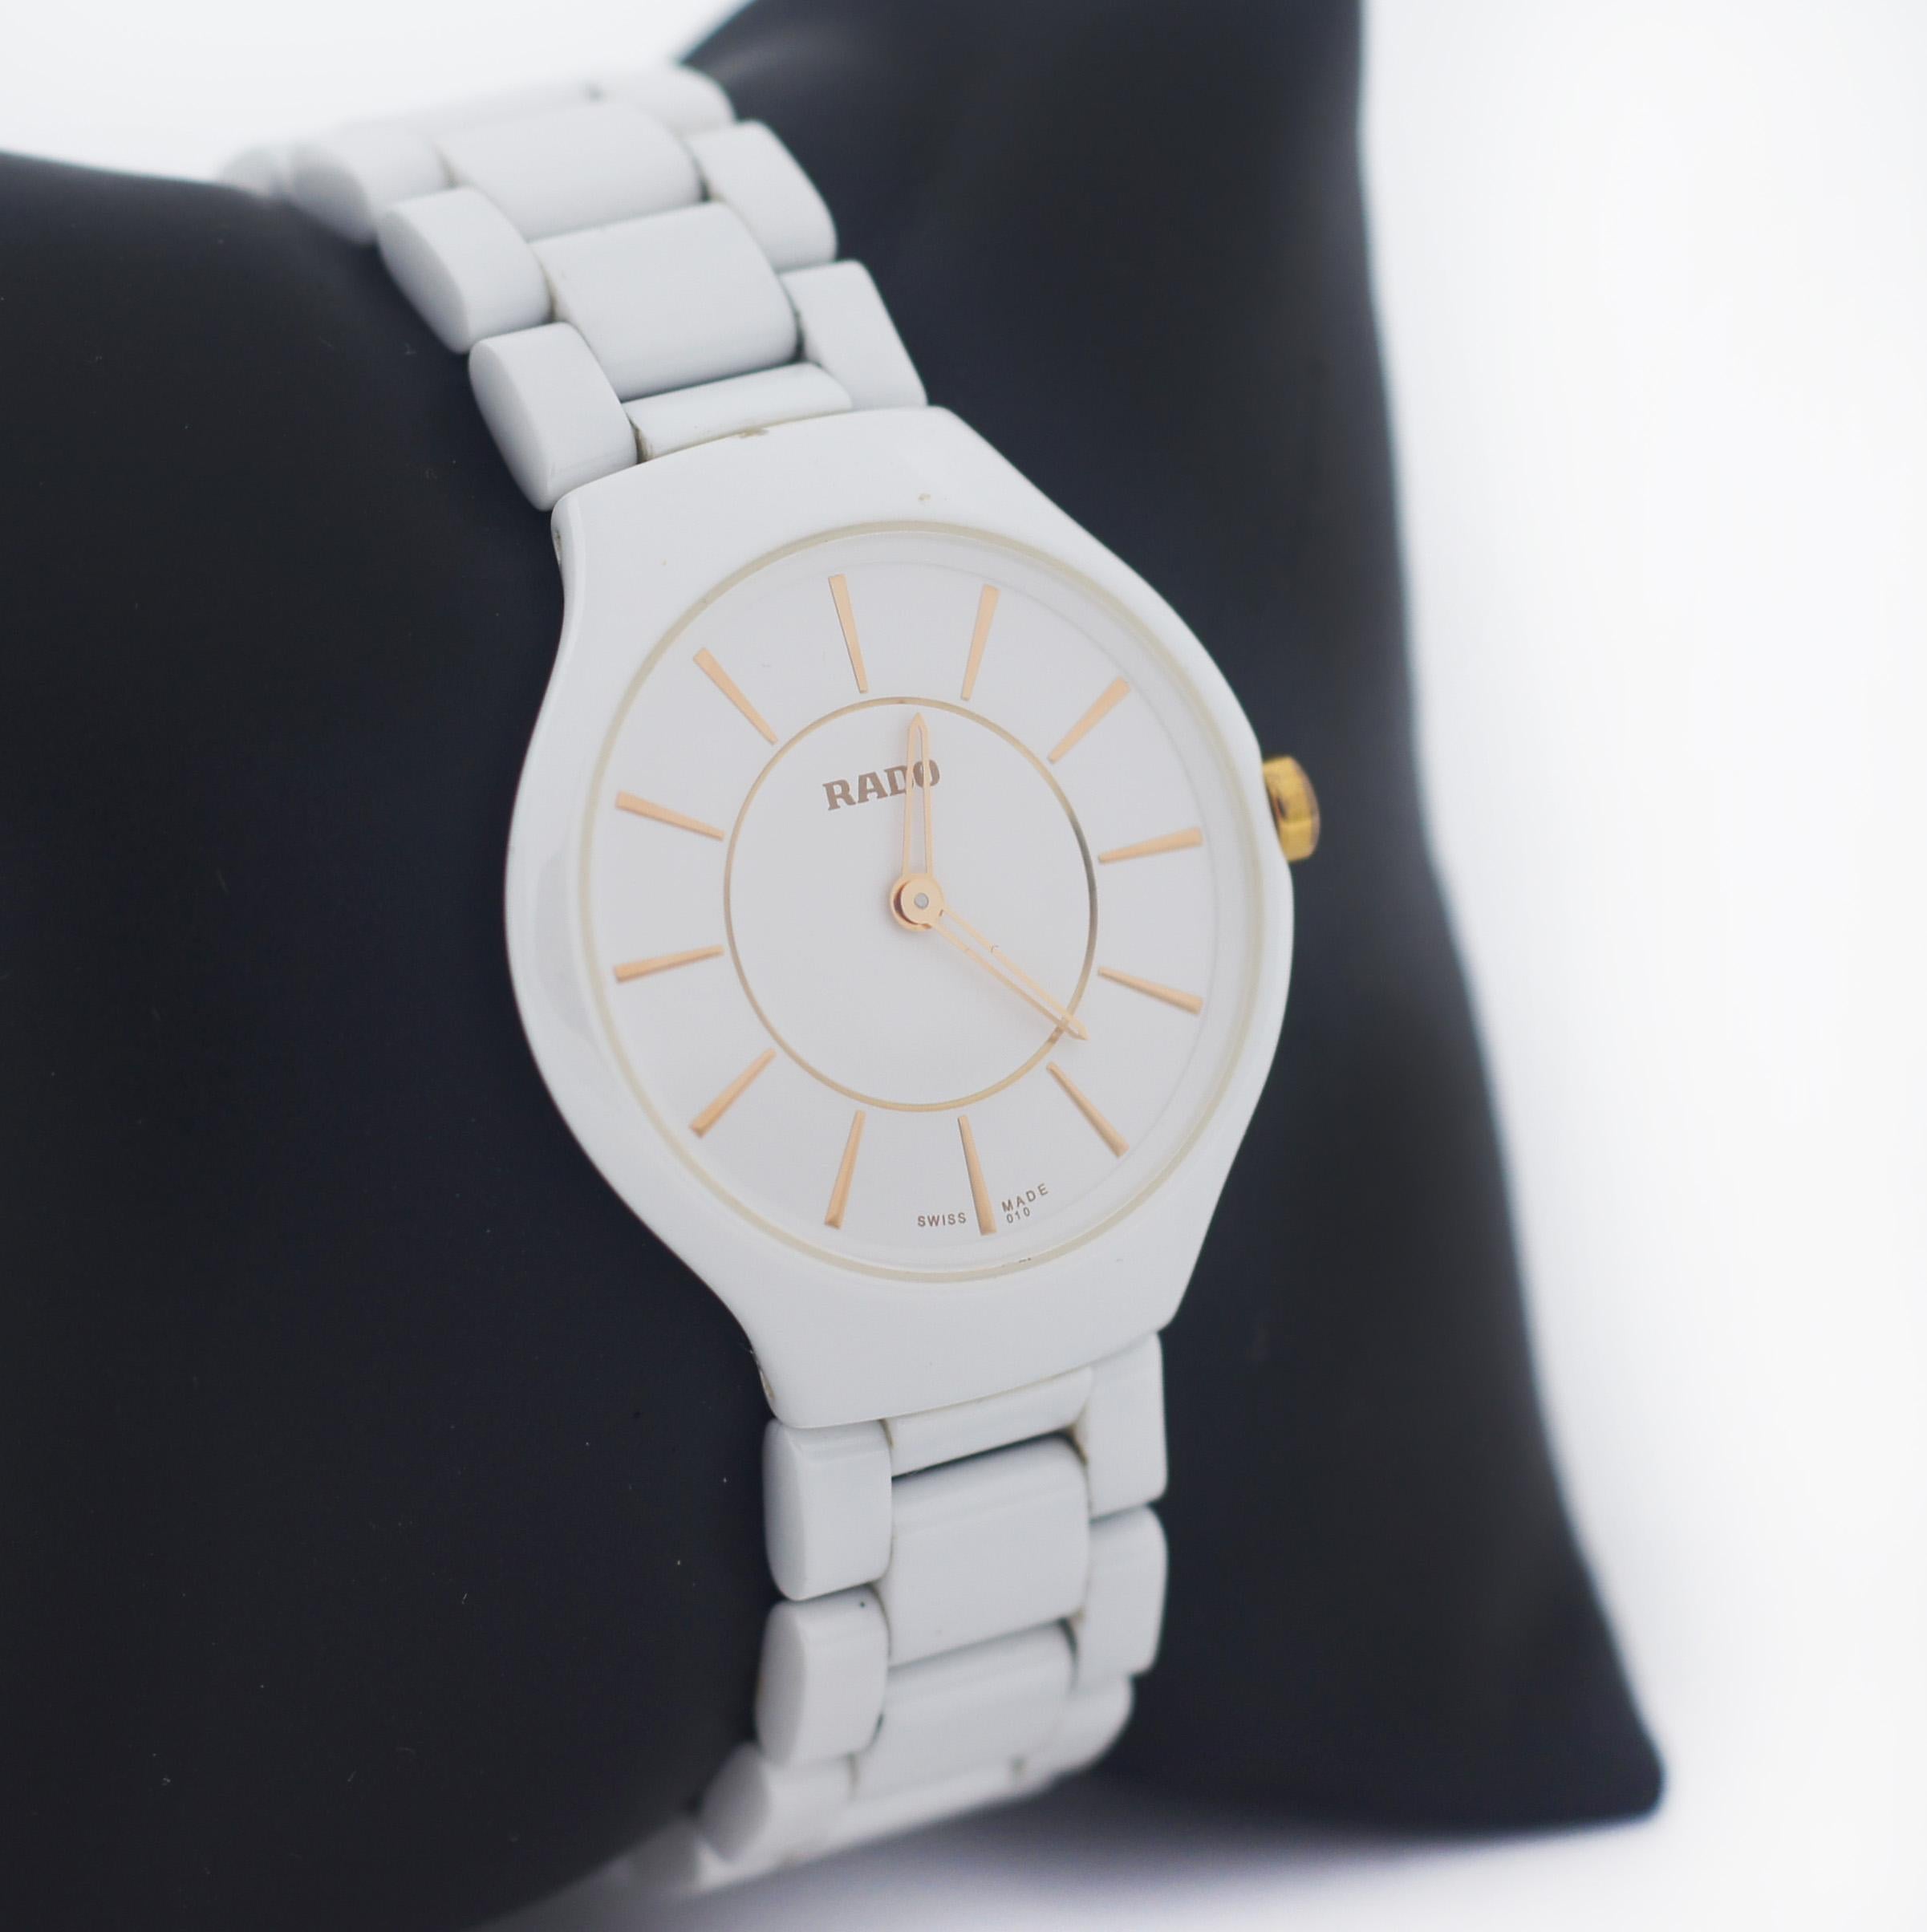 RADO
Model: True Thinline
Case White Ceramic
White Dial
Golden Markers, hands, and crown
Case Size 29 mm
Case Thickness 5mm
Fixed Bezel
Sapphire Crystal
Swiss Made
Movement Quartz
Watch Shape Round
Caseback Snap
Band White Ceramic
Band Width 15